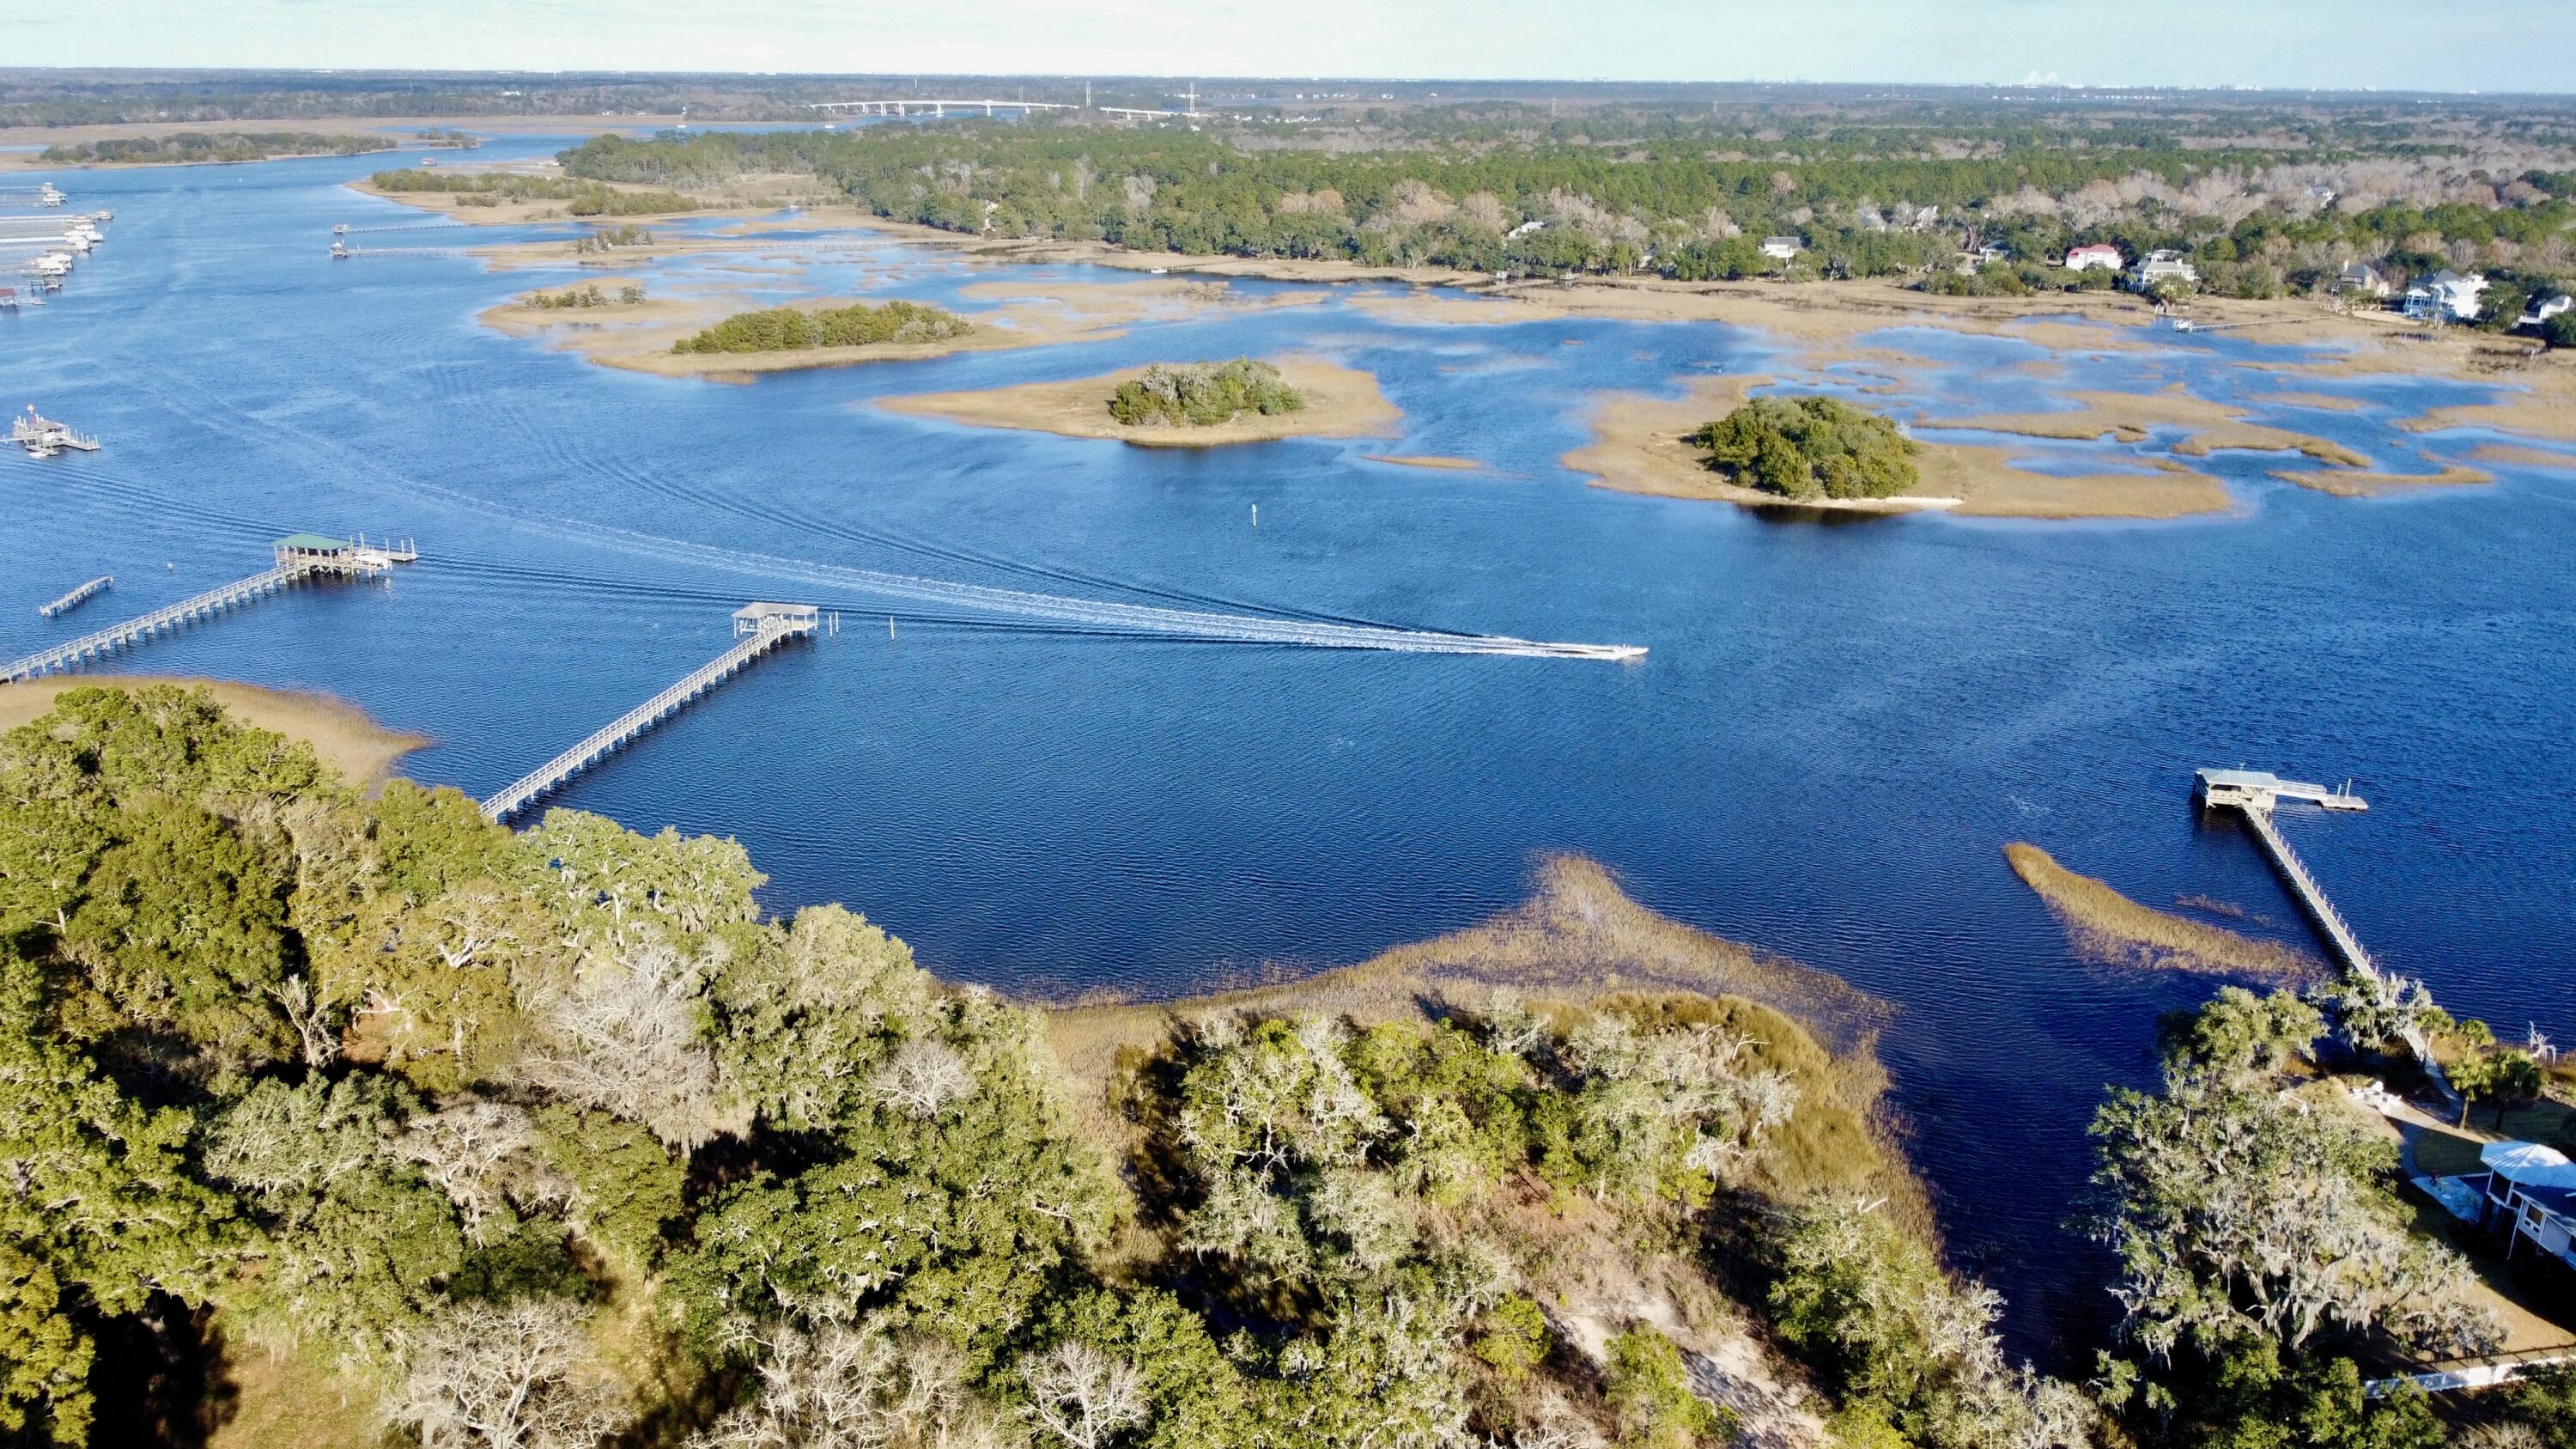 Flying High overlooking the Stono River